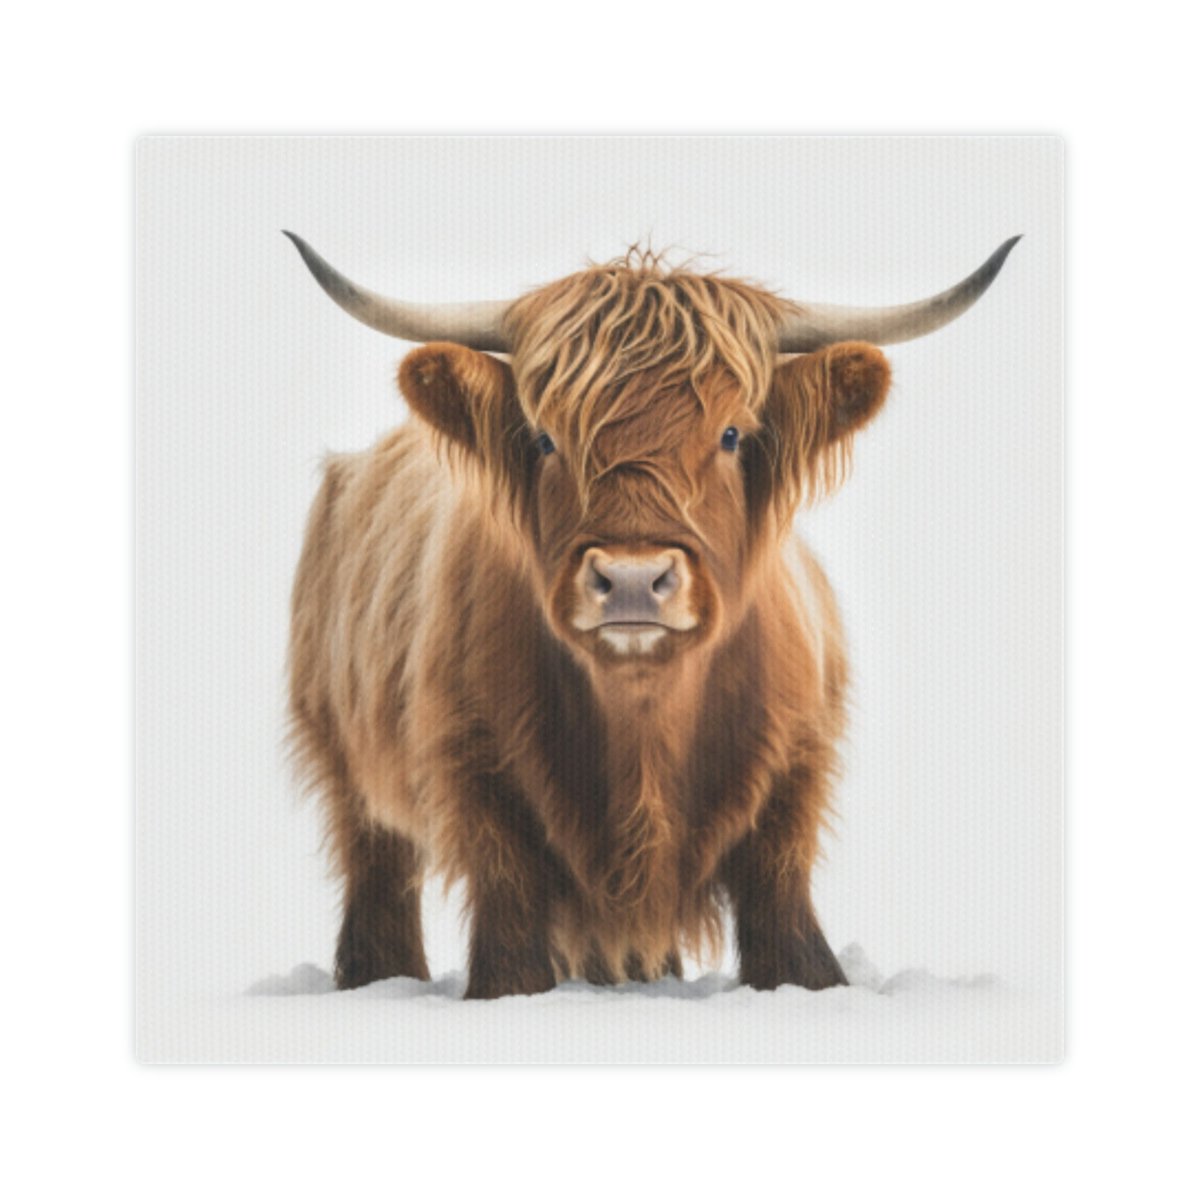 Excited to share the latest addition to my #etsy shop: Highland Cow Wall Art, Highland Cow Print, Highland Cow, Canvas Photo Tile etsy.me/421kImt #highlandcowart #highlandcowdecor #highlandcow #highlandcowlover #cowlover #cowgift #wunderbycali